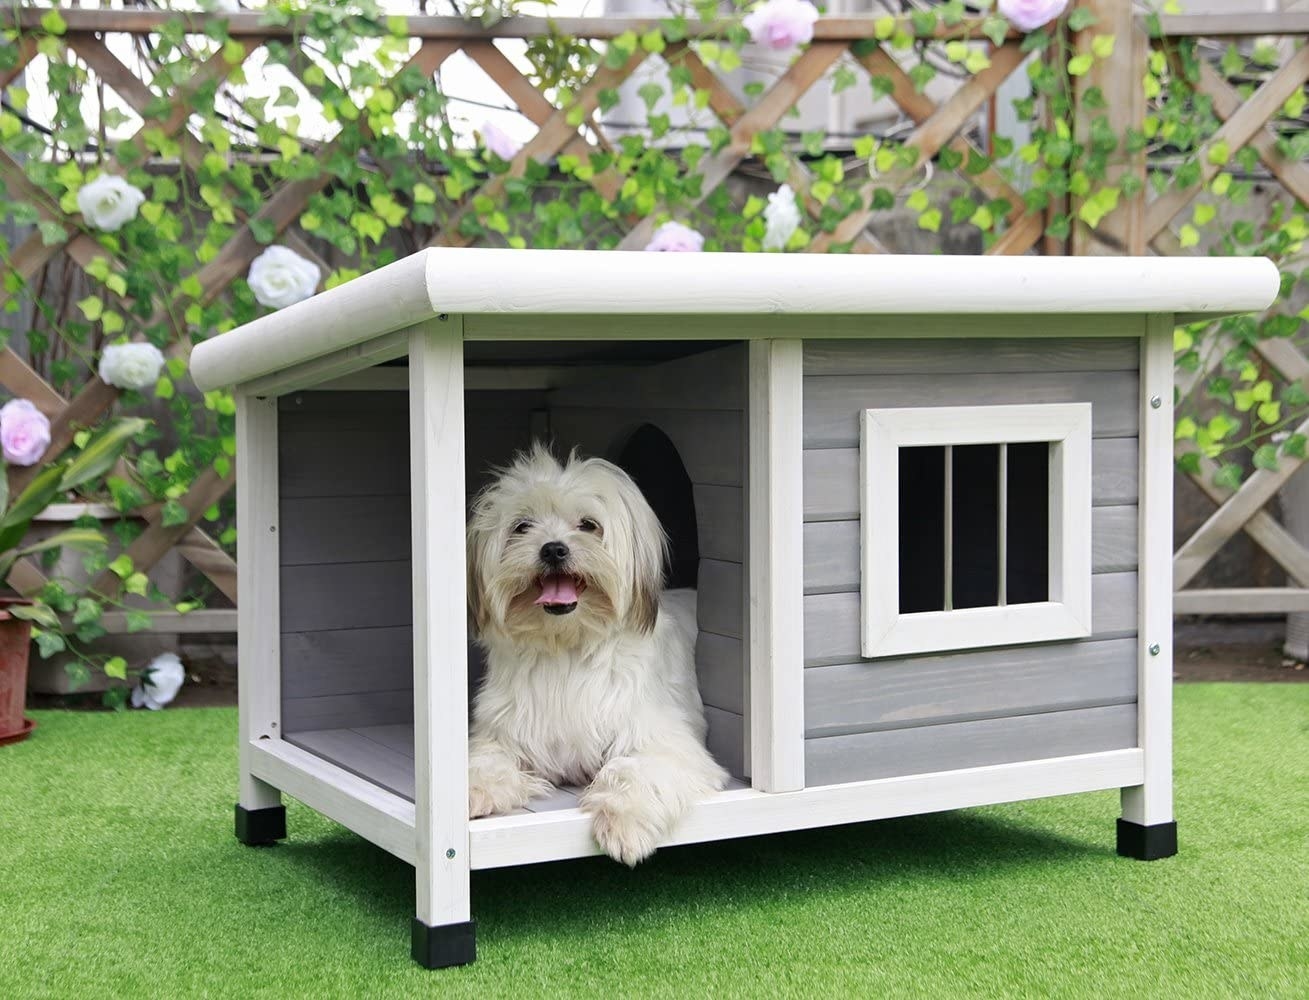 dog in the dog house